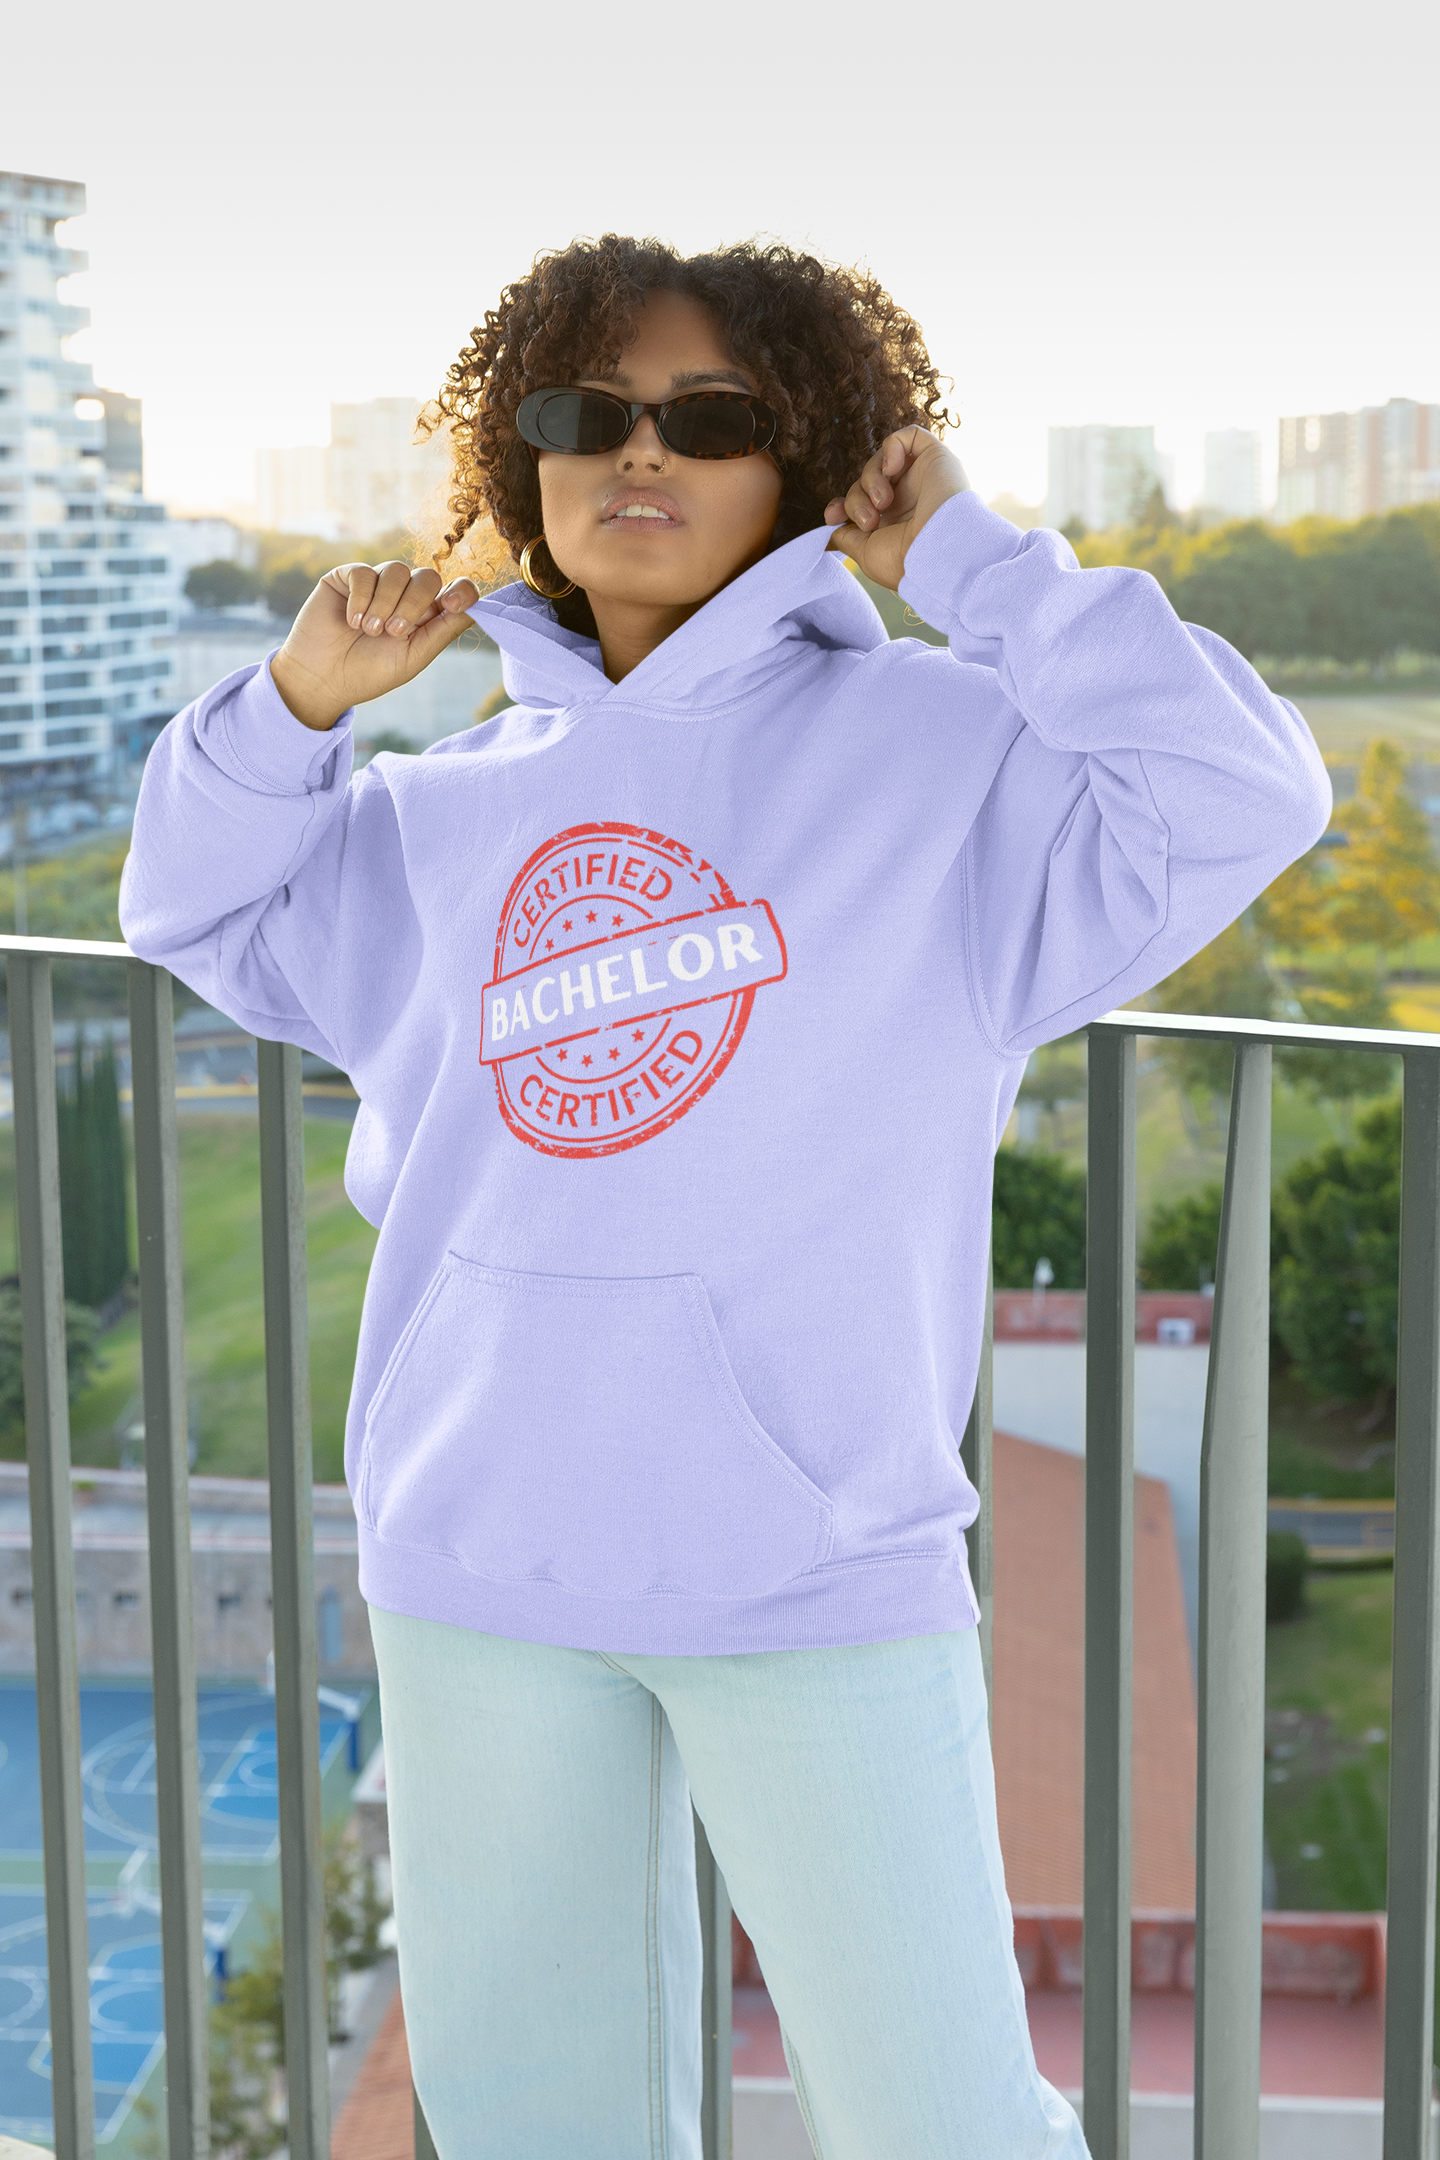 Certified Bachelor Women's Relaxed Fit Hoodie